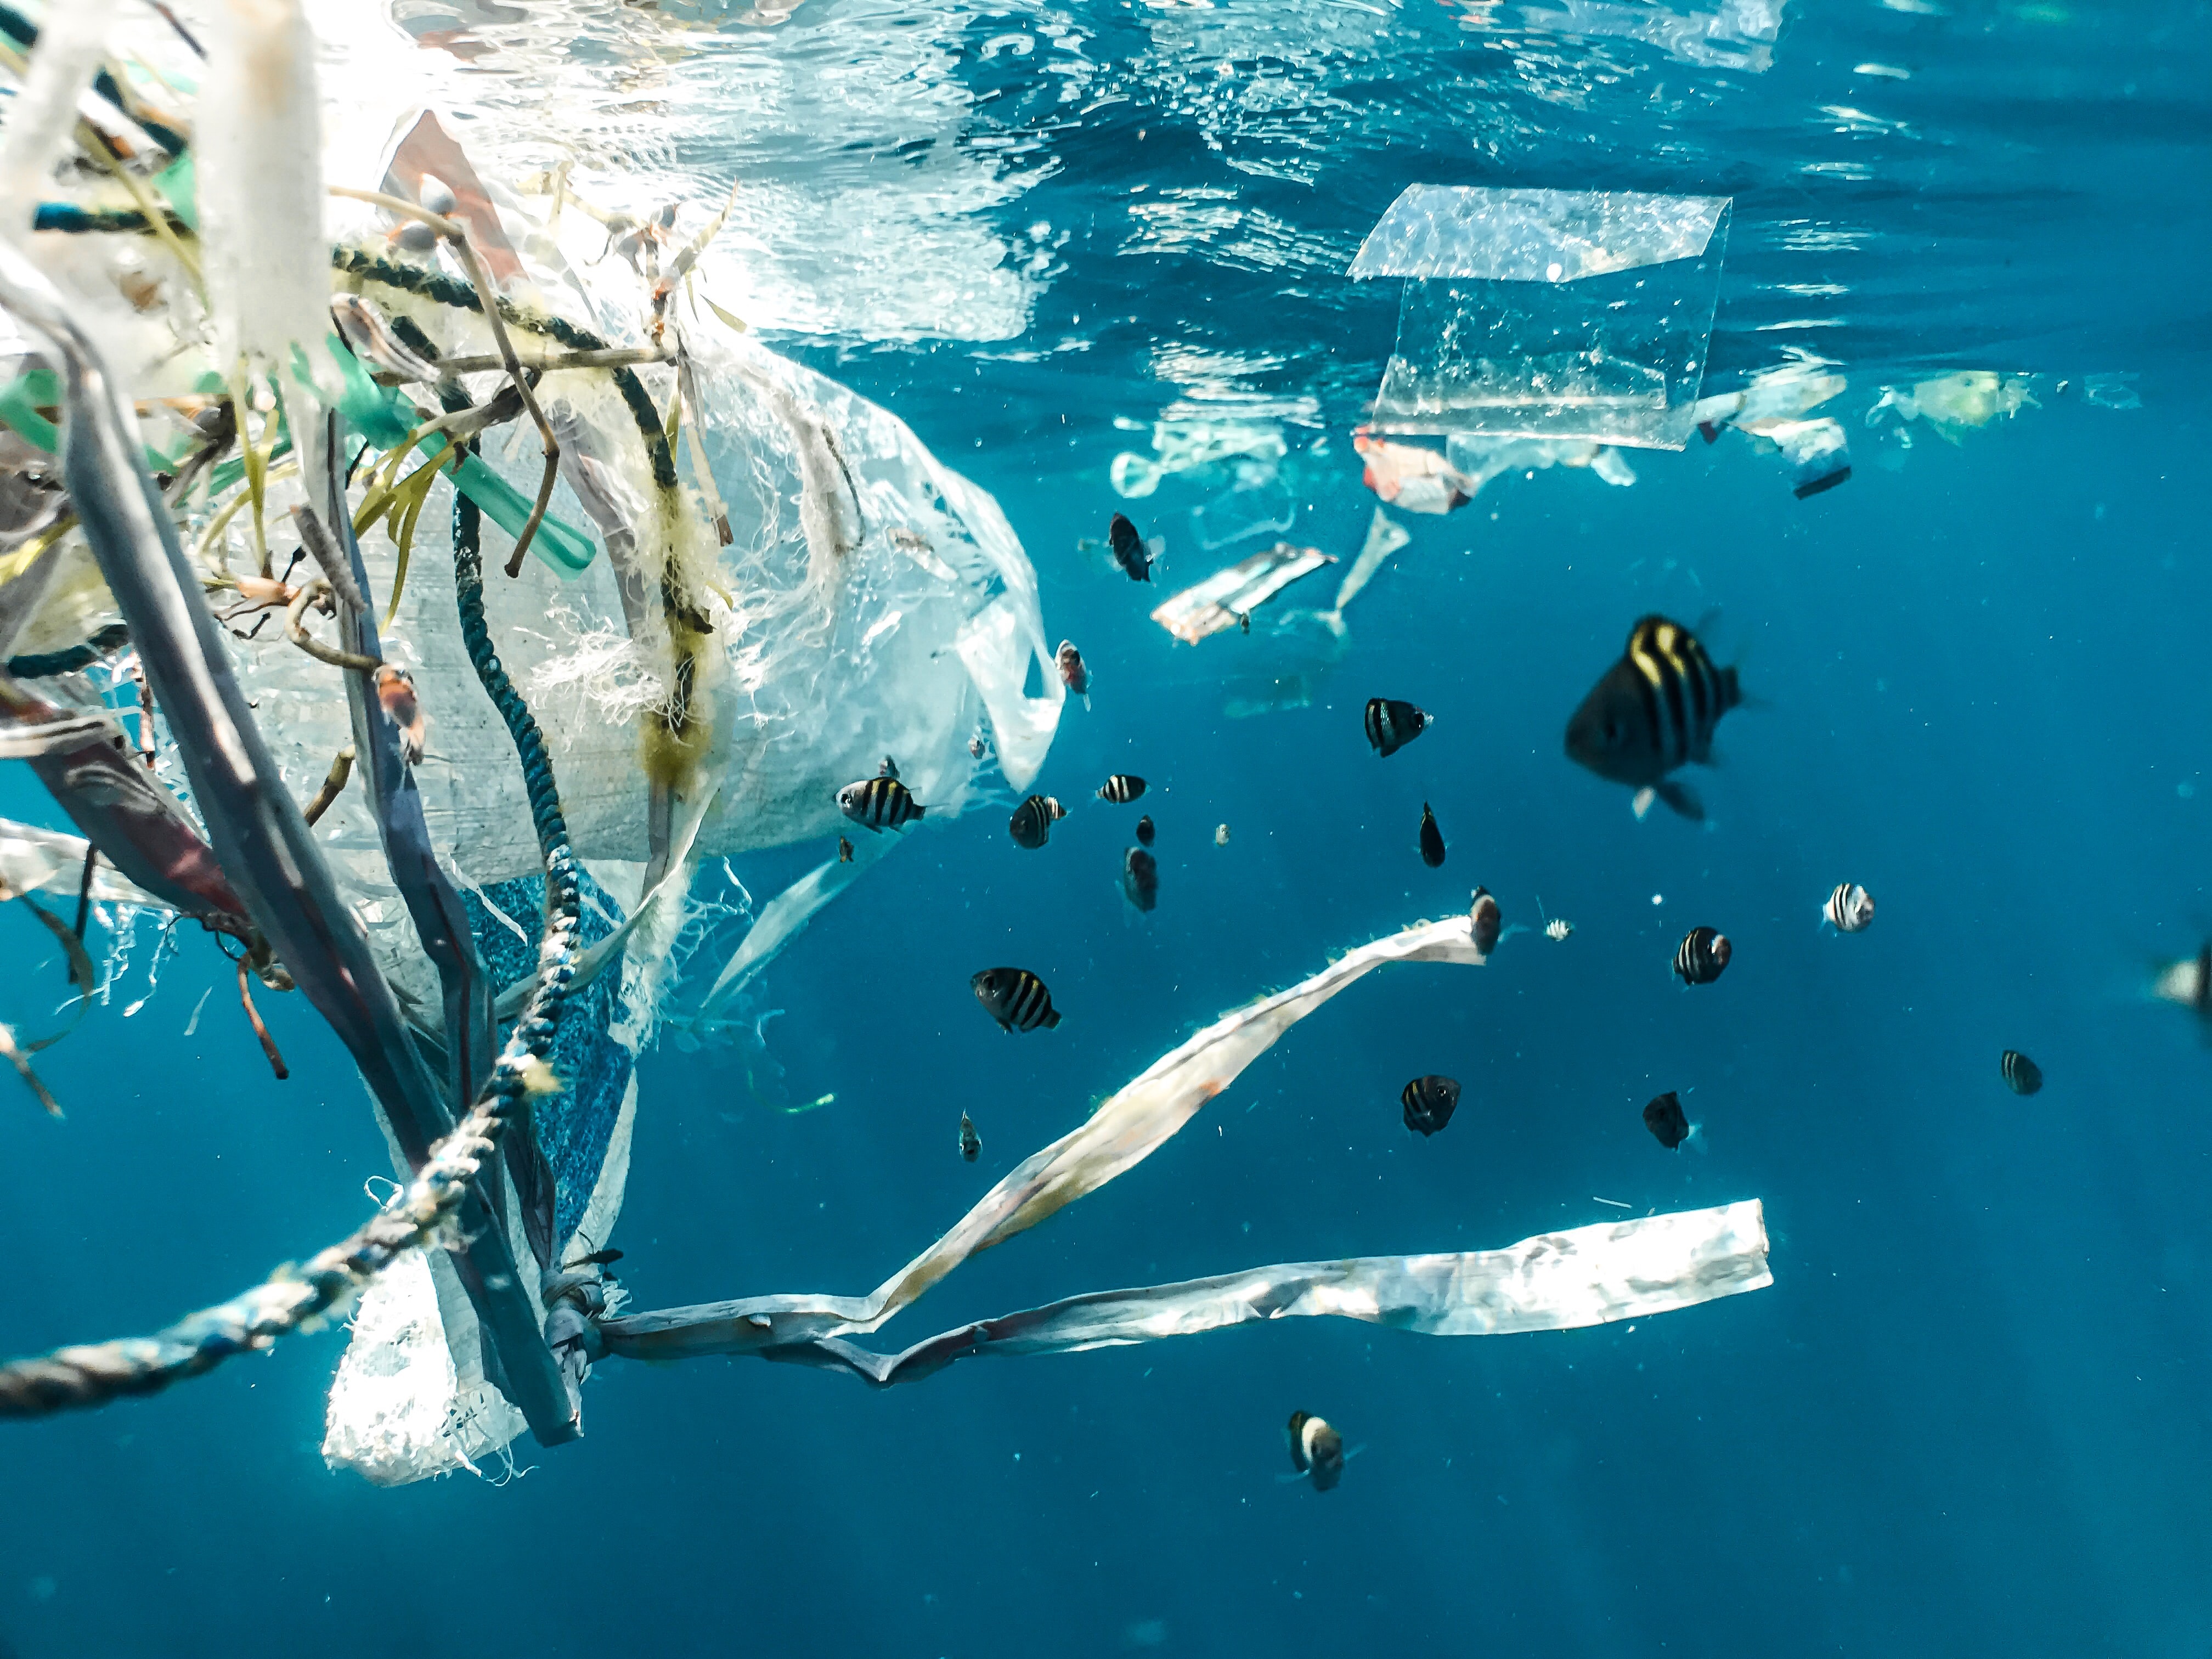 Perspex and Polycarbonate in marine environments - Simply Plastics